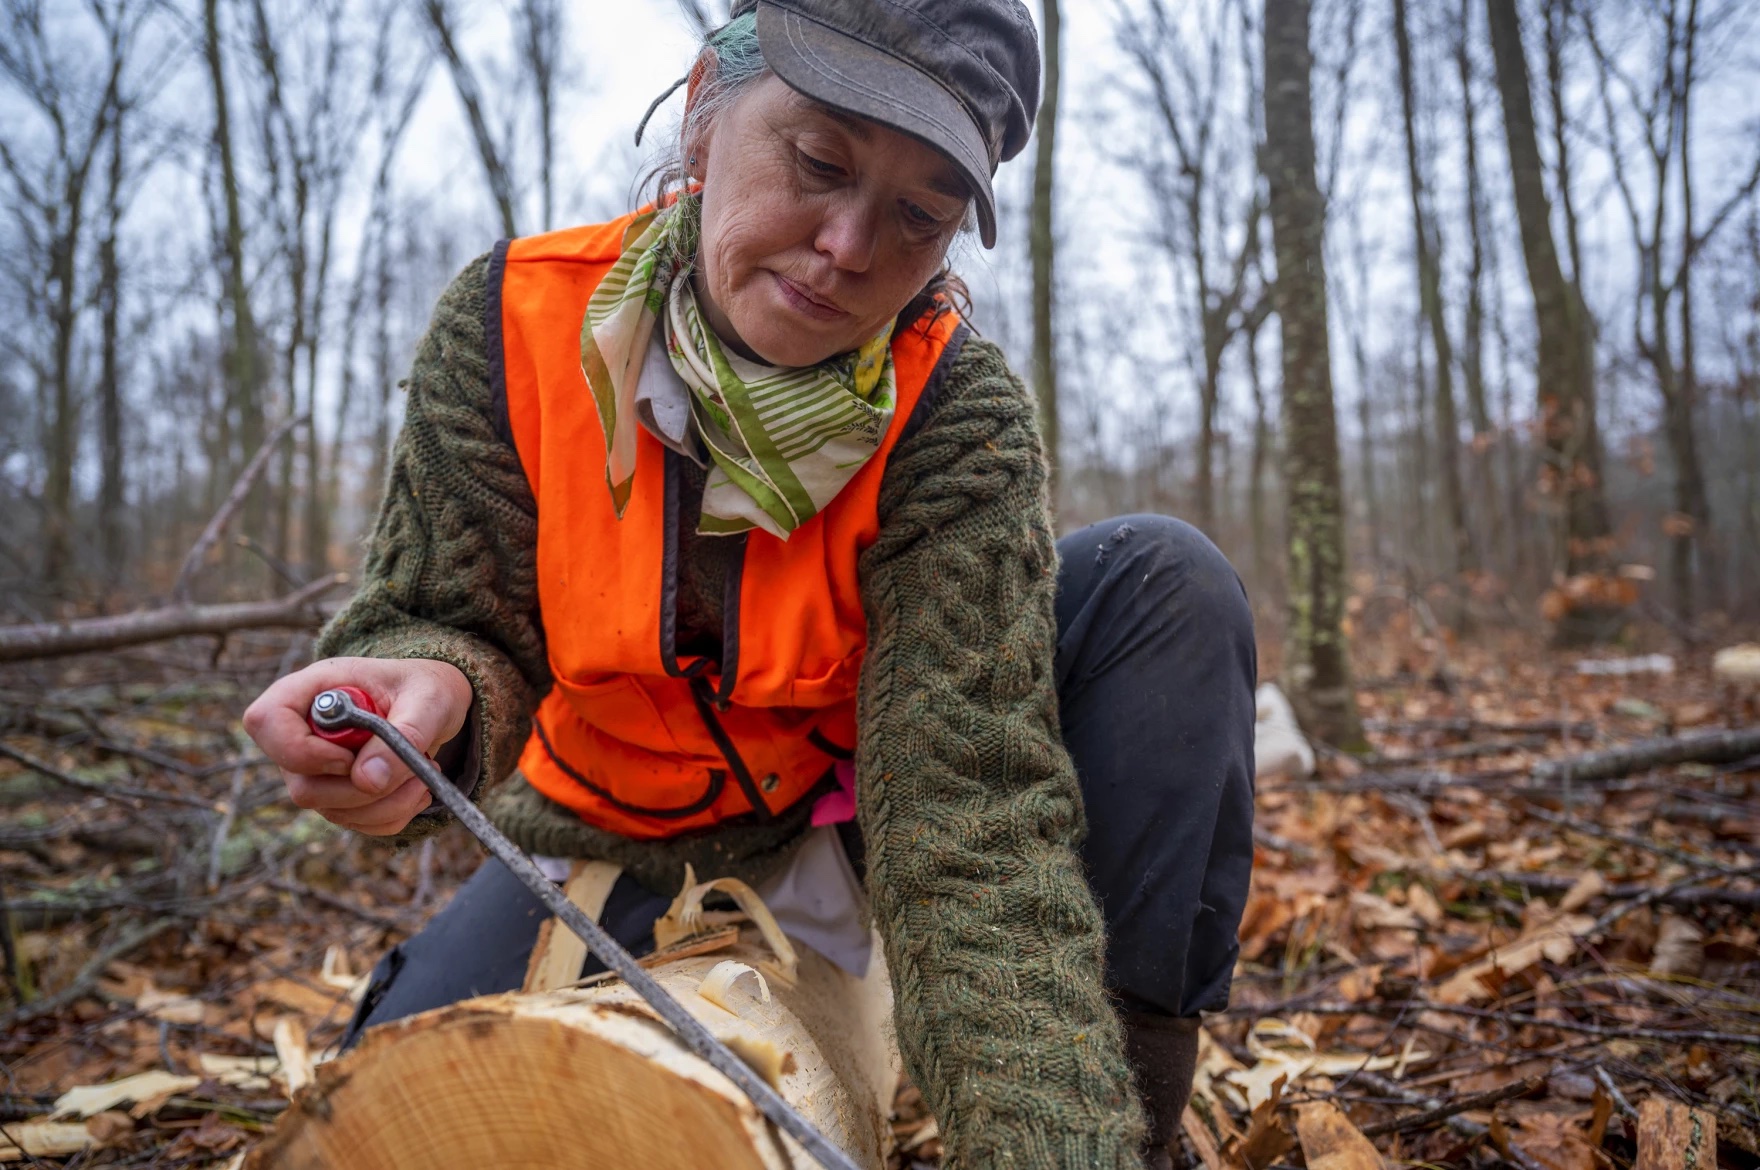 A person in a visibility vest cuts bark off of a log in the forest.